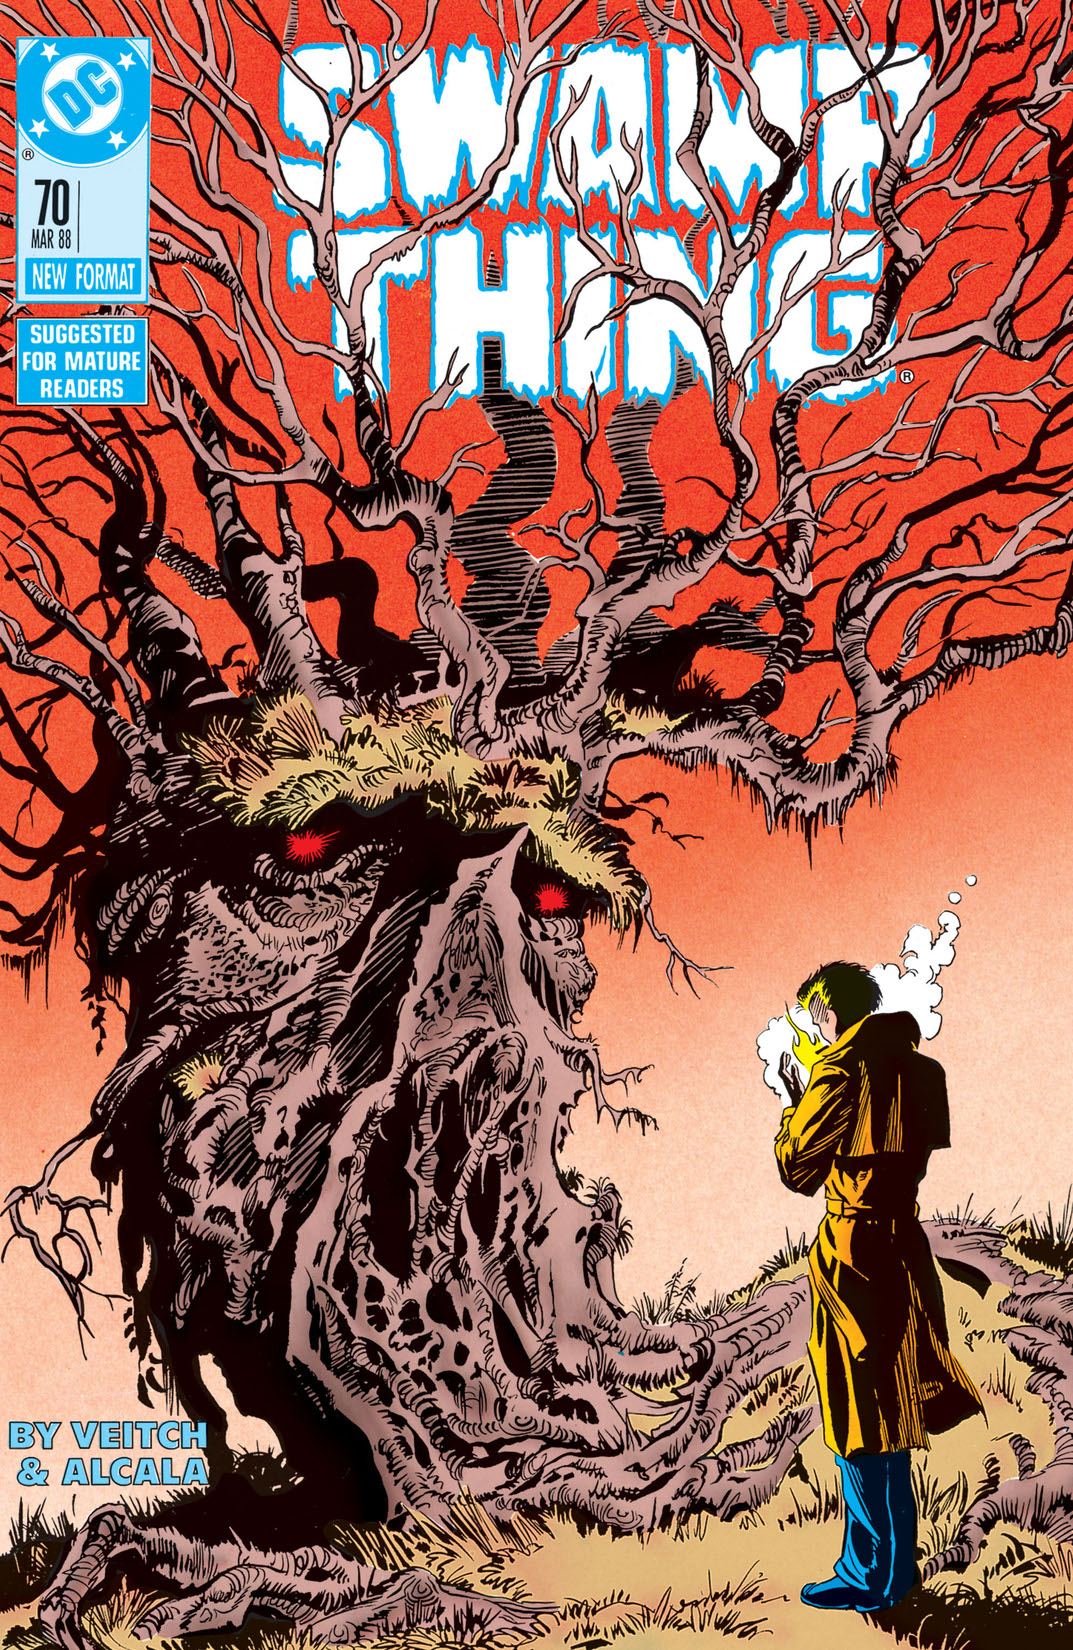 Swamp Thing (1985-1996) #70 preview images